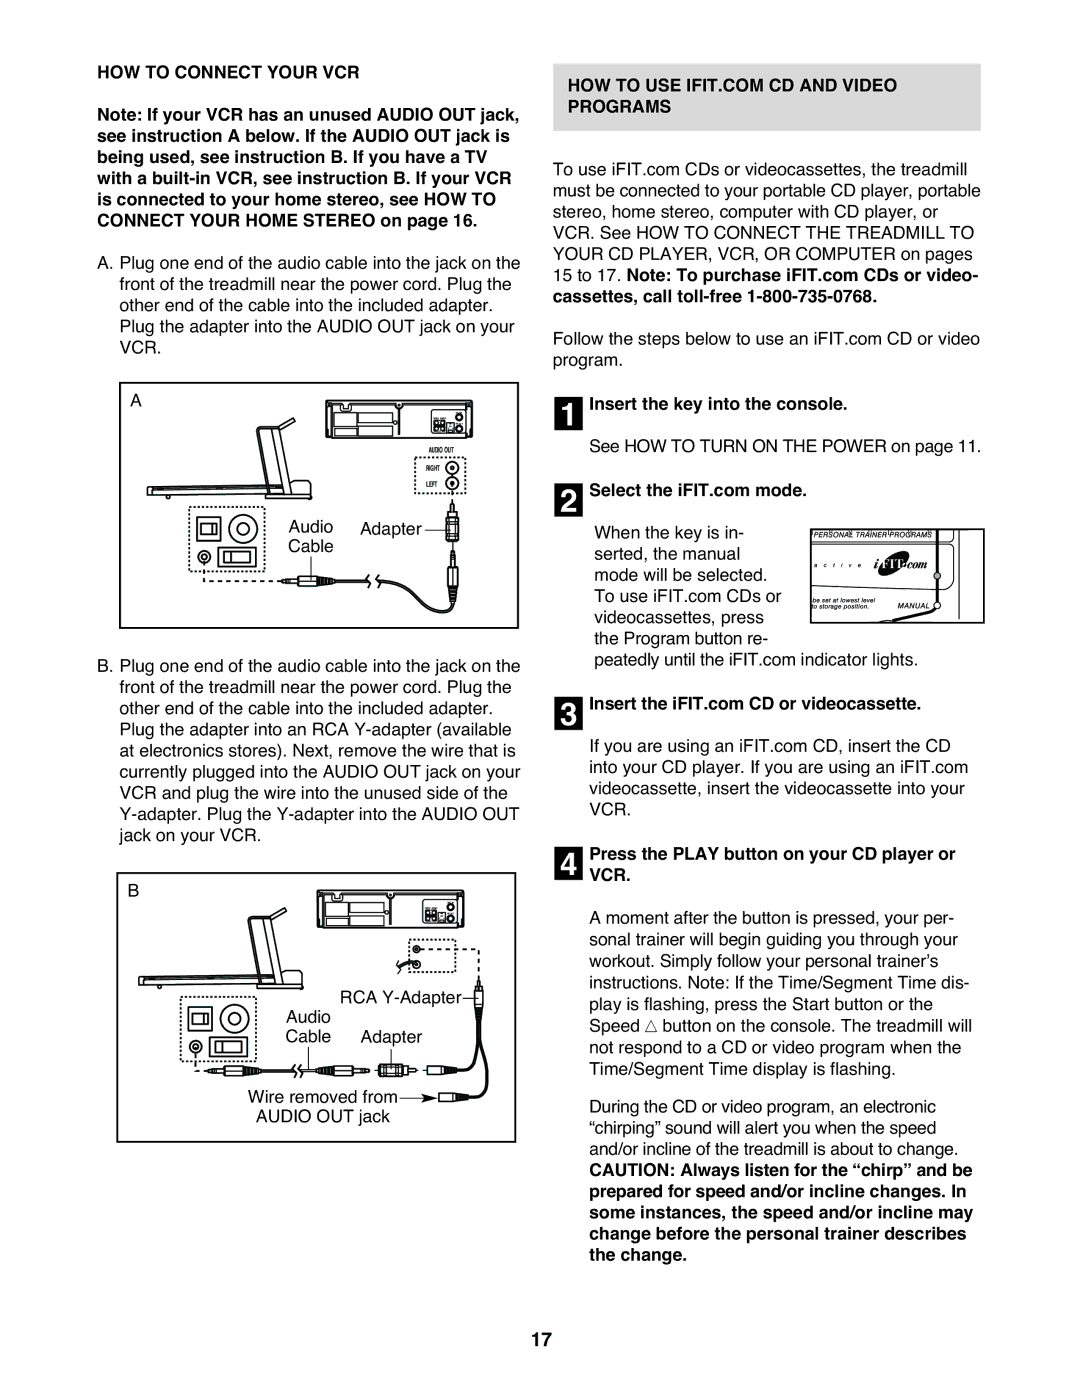 ProForm PFTL71230 user manual HOW to Connect Your VCR, Audio Adapter Cable, Insert the key into the console 